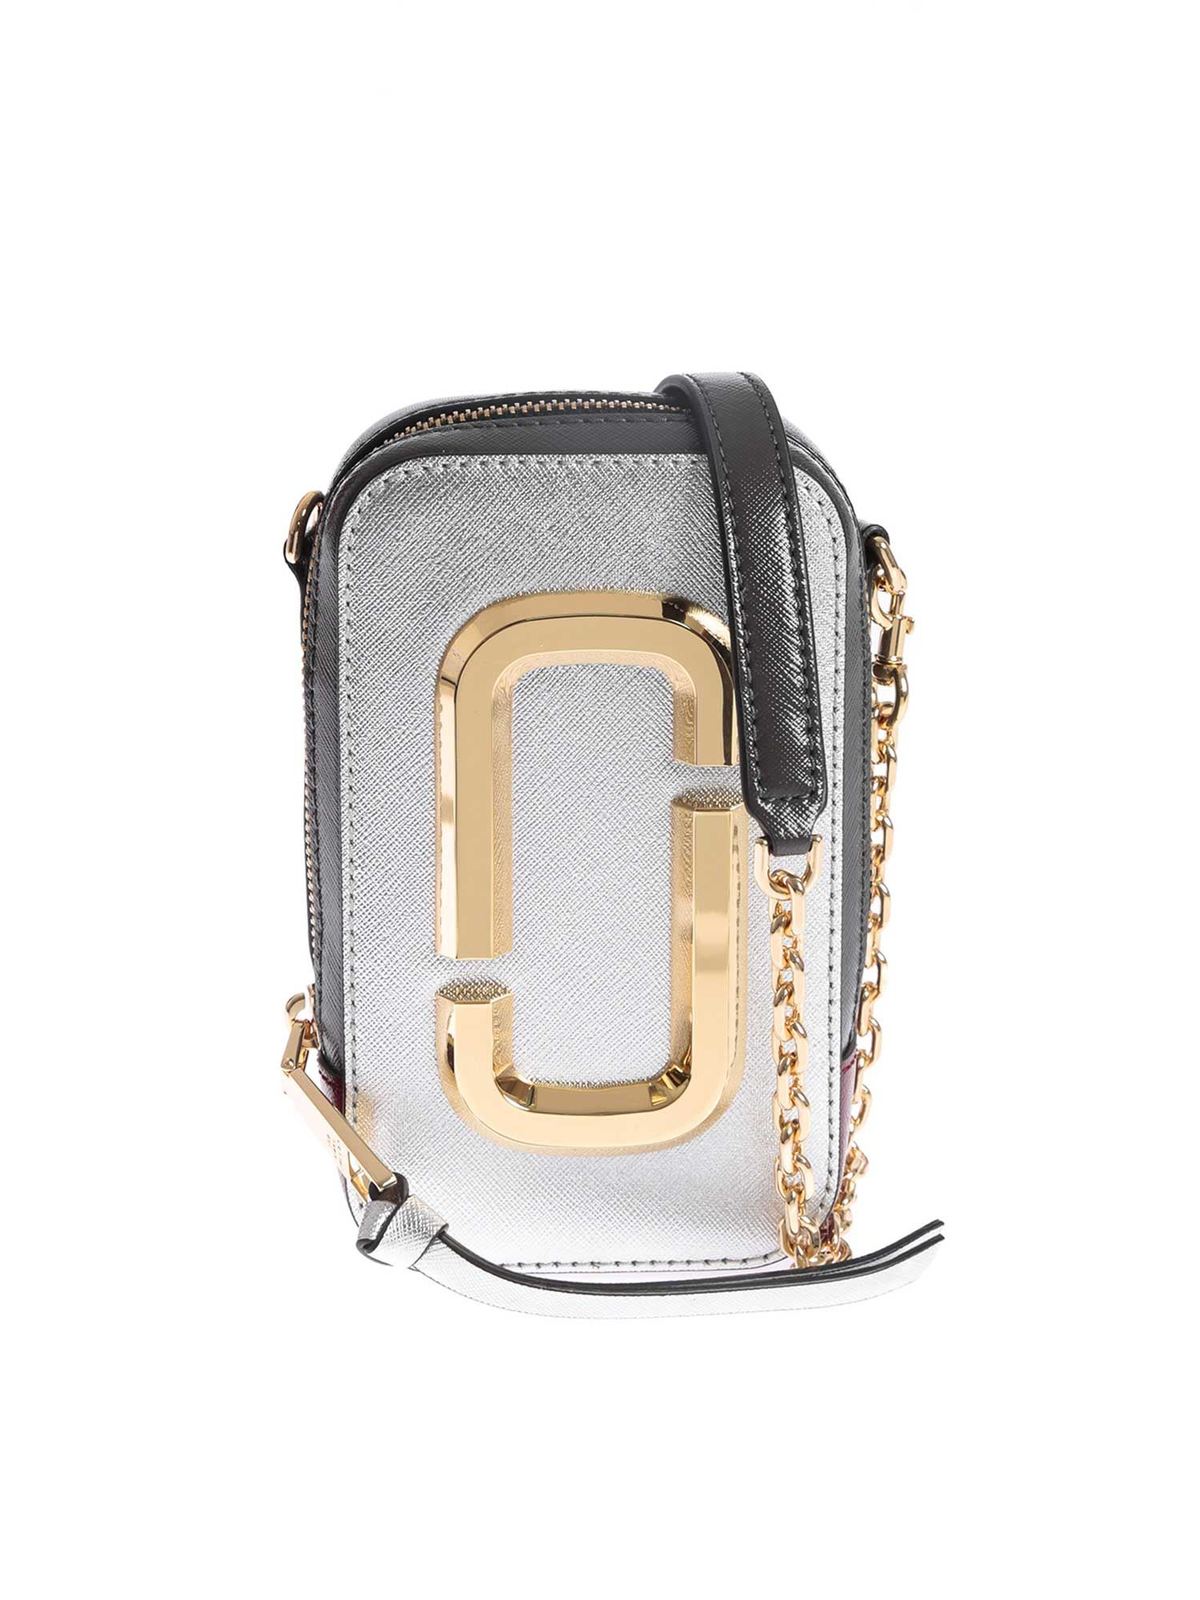 Cross body bags Marc Jacobs - The Hot Shot bag in silver color - M0016765098